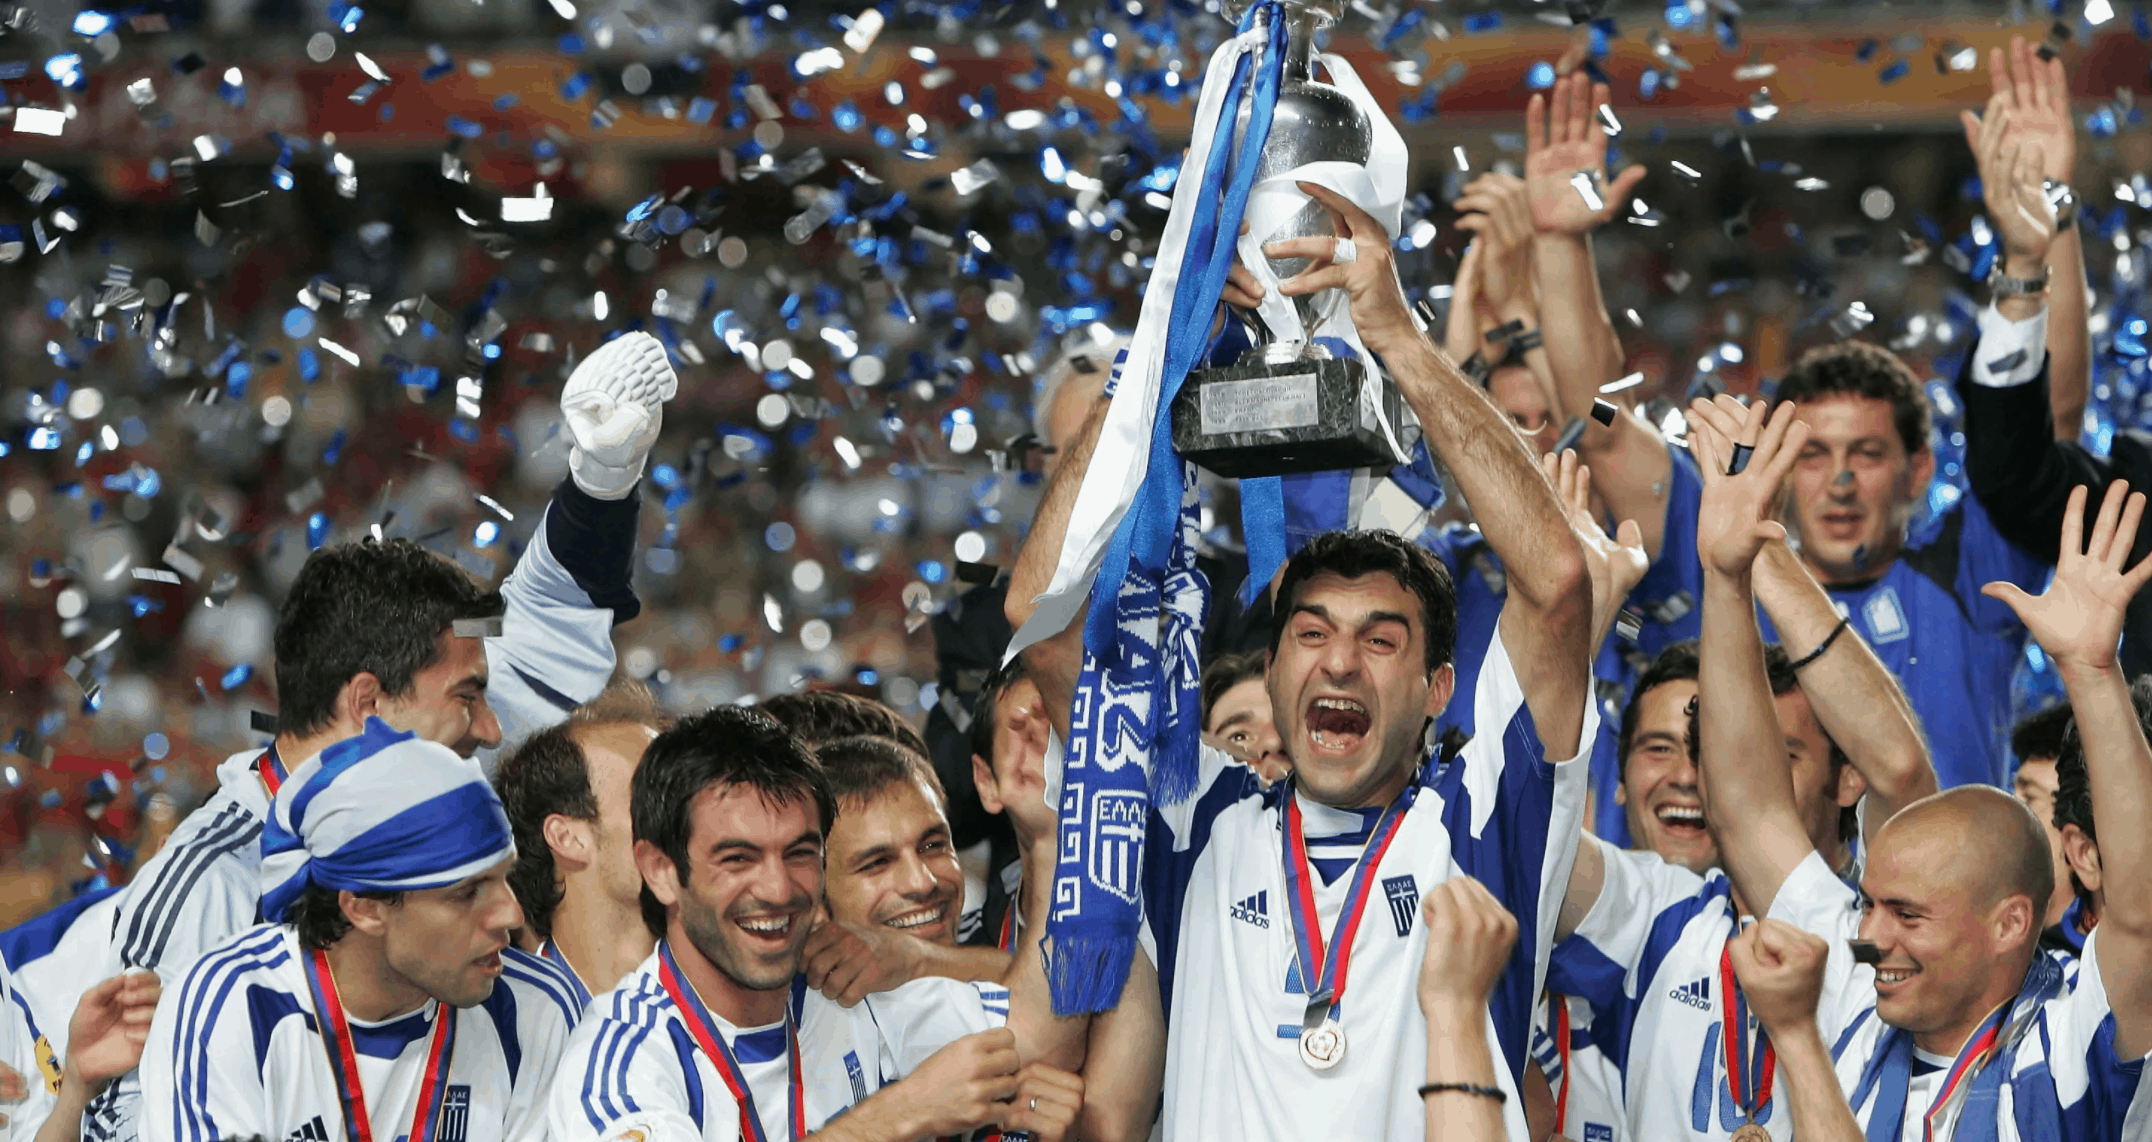 On this day in 2004, Greece won the Euro Cup